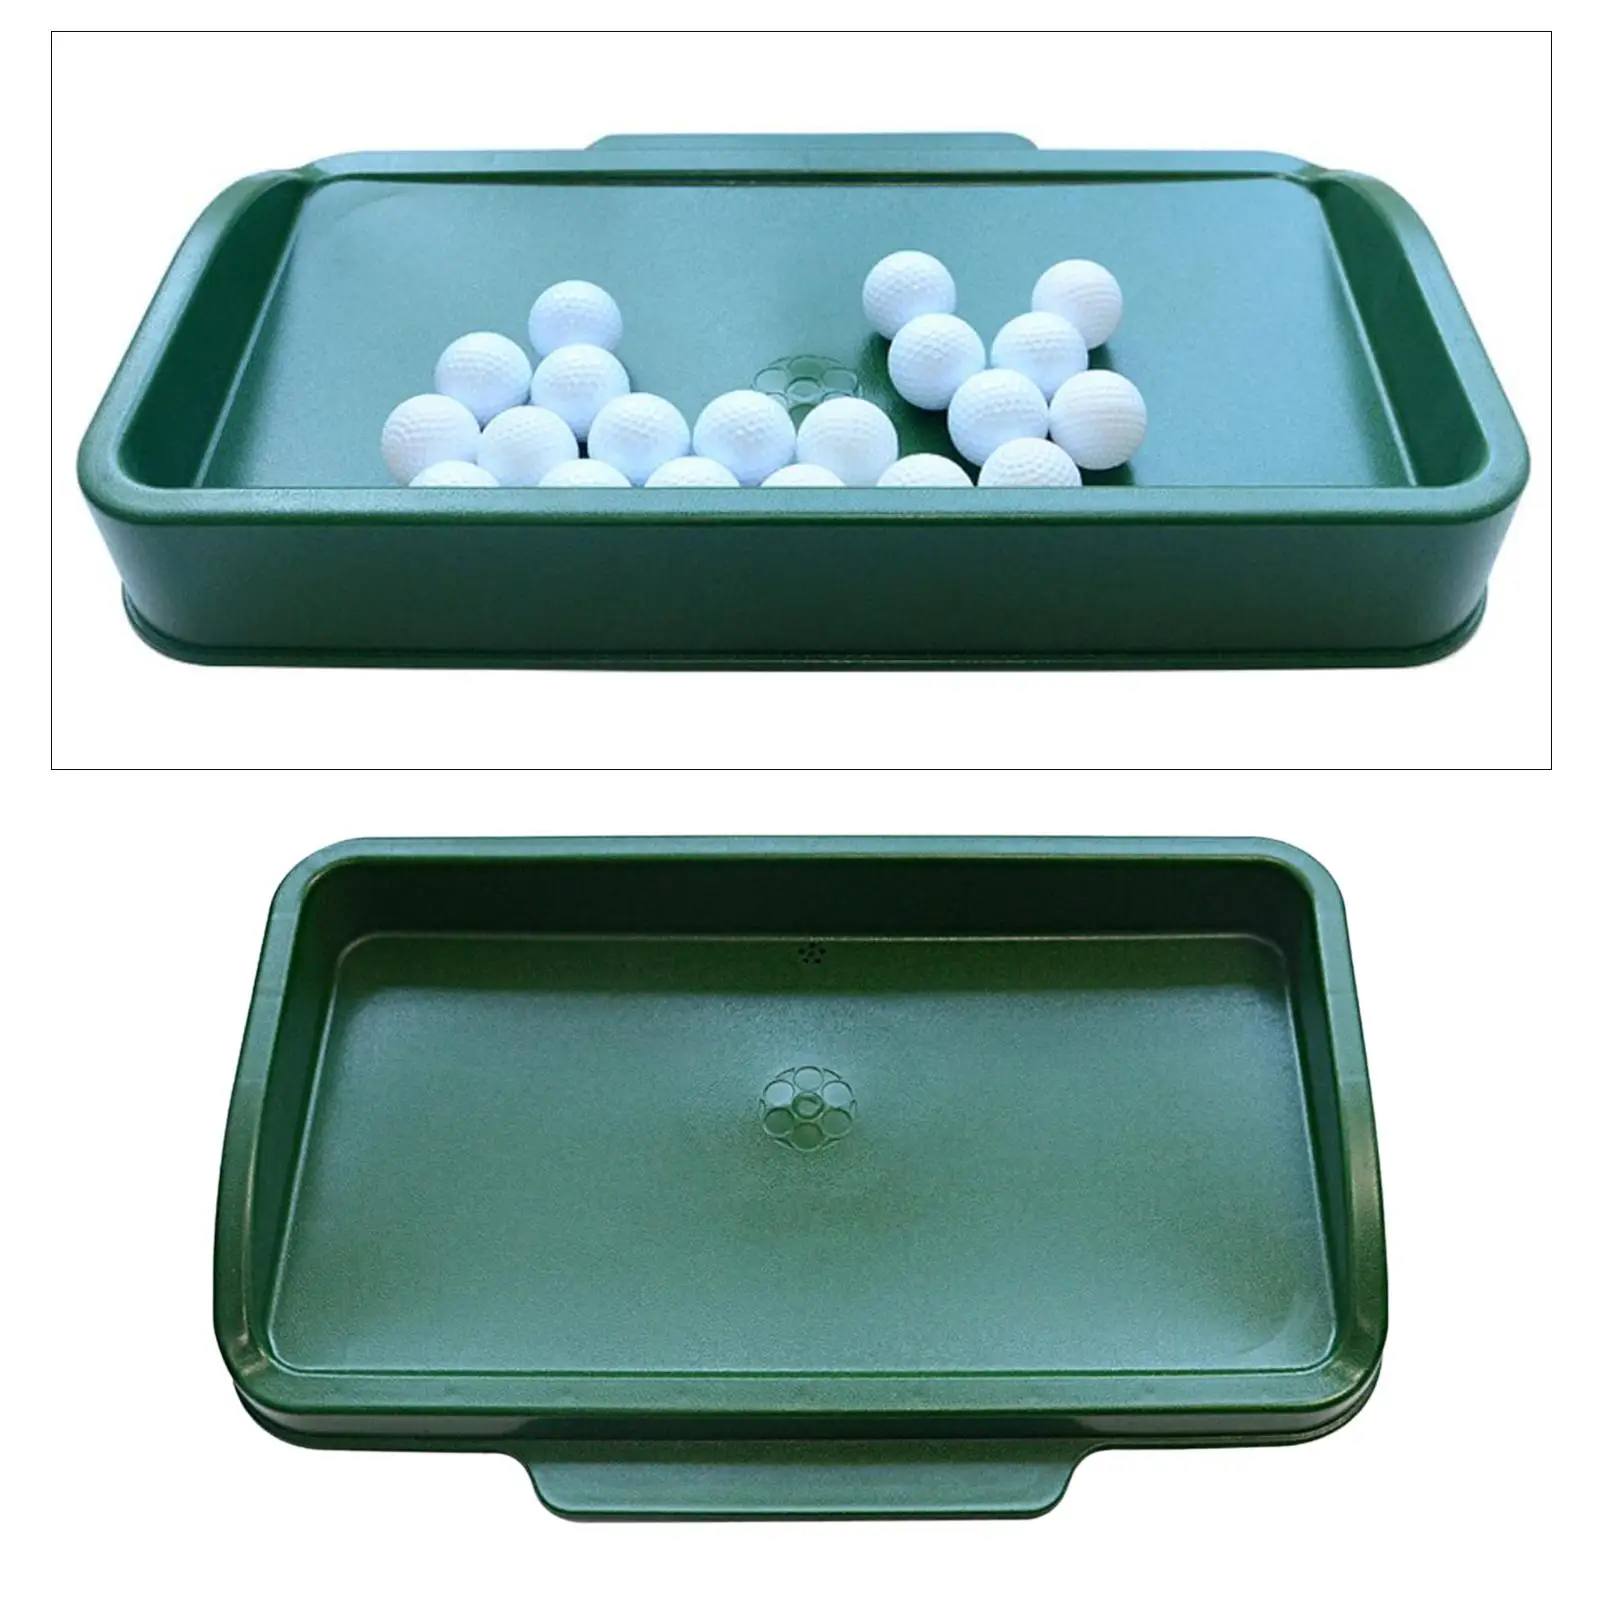 Golf Ball Tray Driving Range Golf Balls Storage Container Driving Range Golf Balls Organizer Box for Practice Golf Accessories